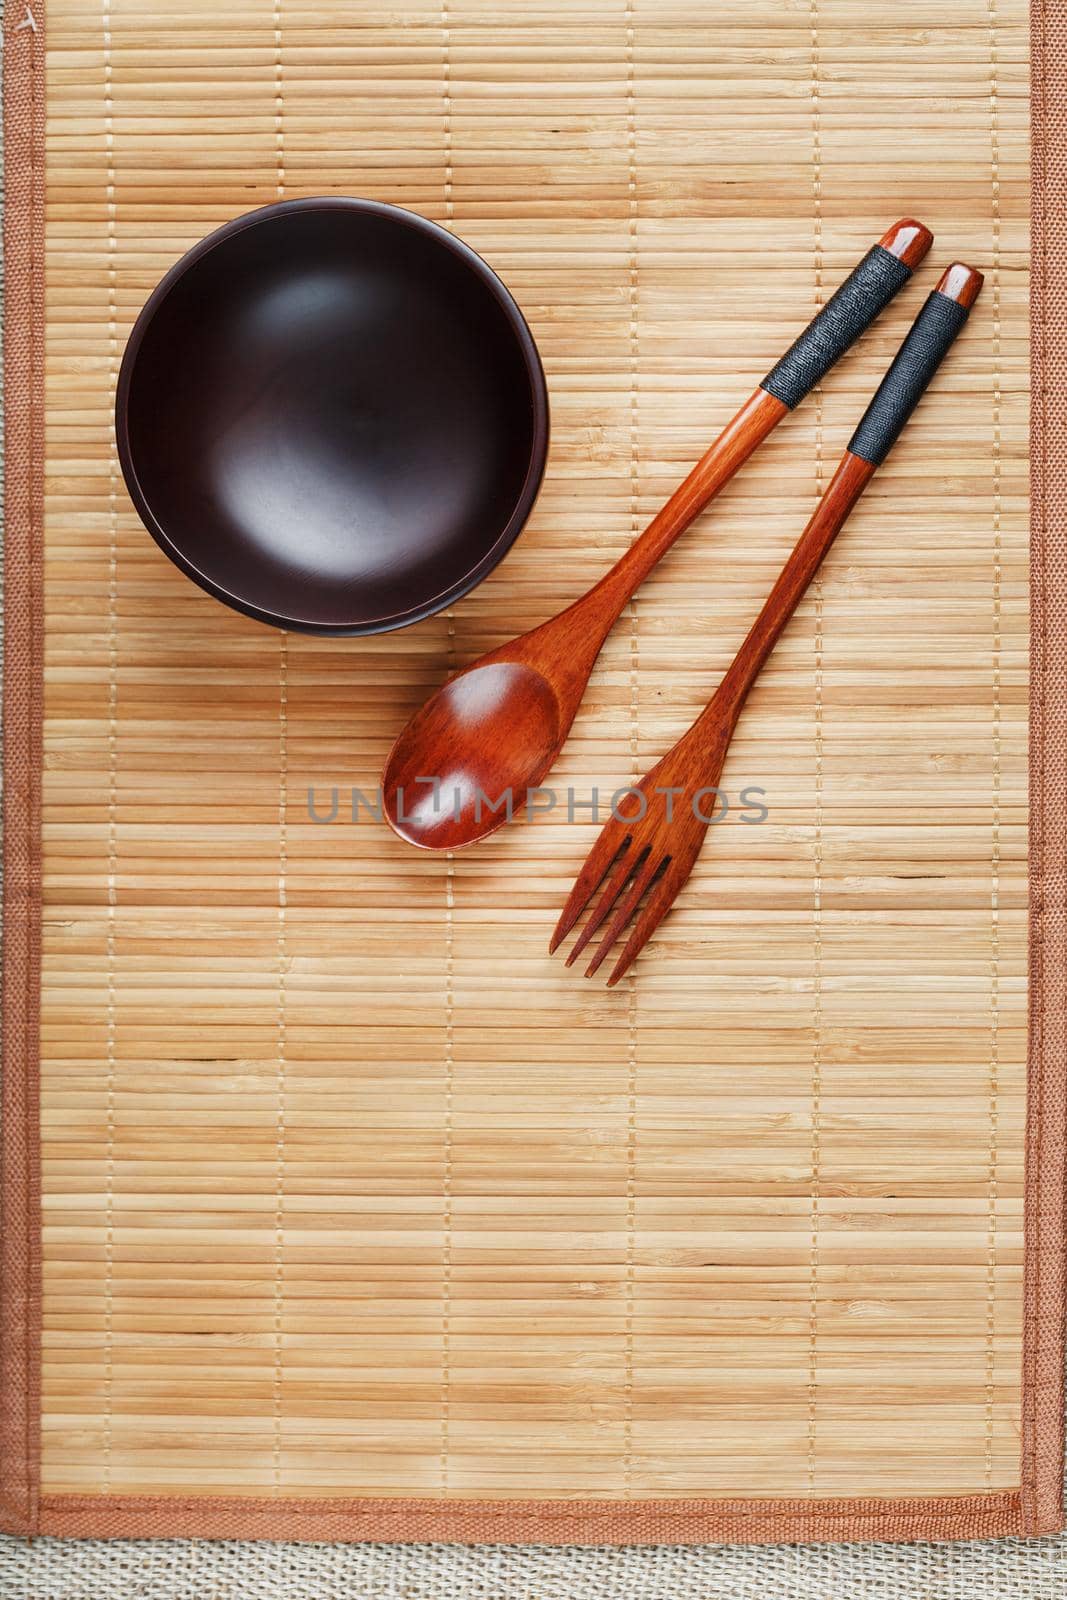 Utensils made of wood, bowl and spoons on a cutting board on a white background by AlexGrec